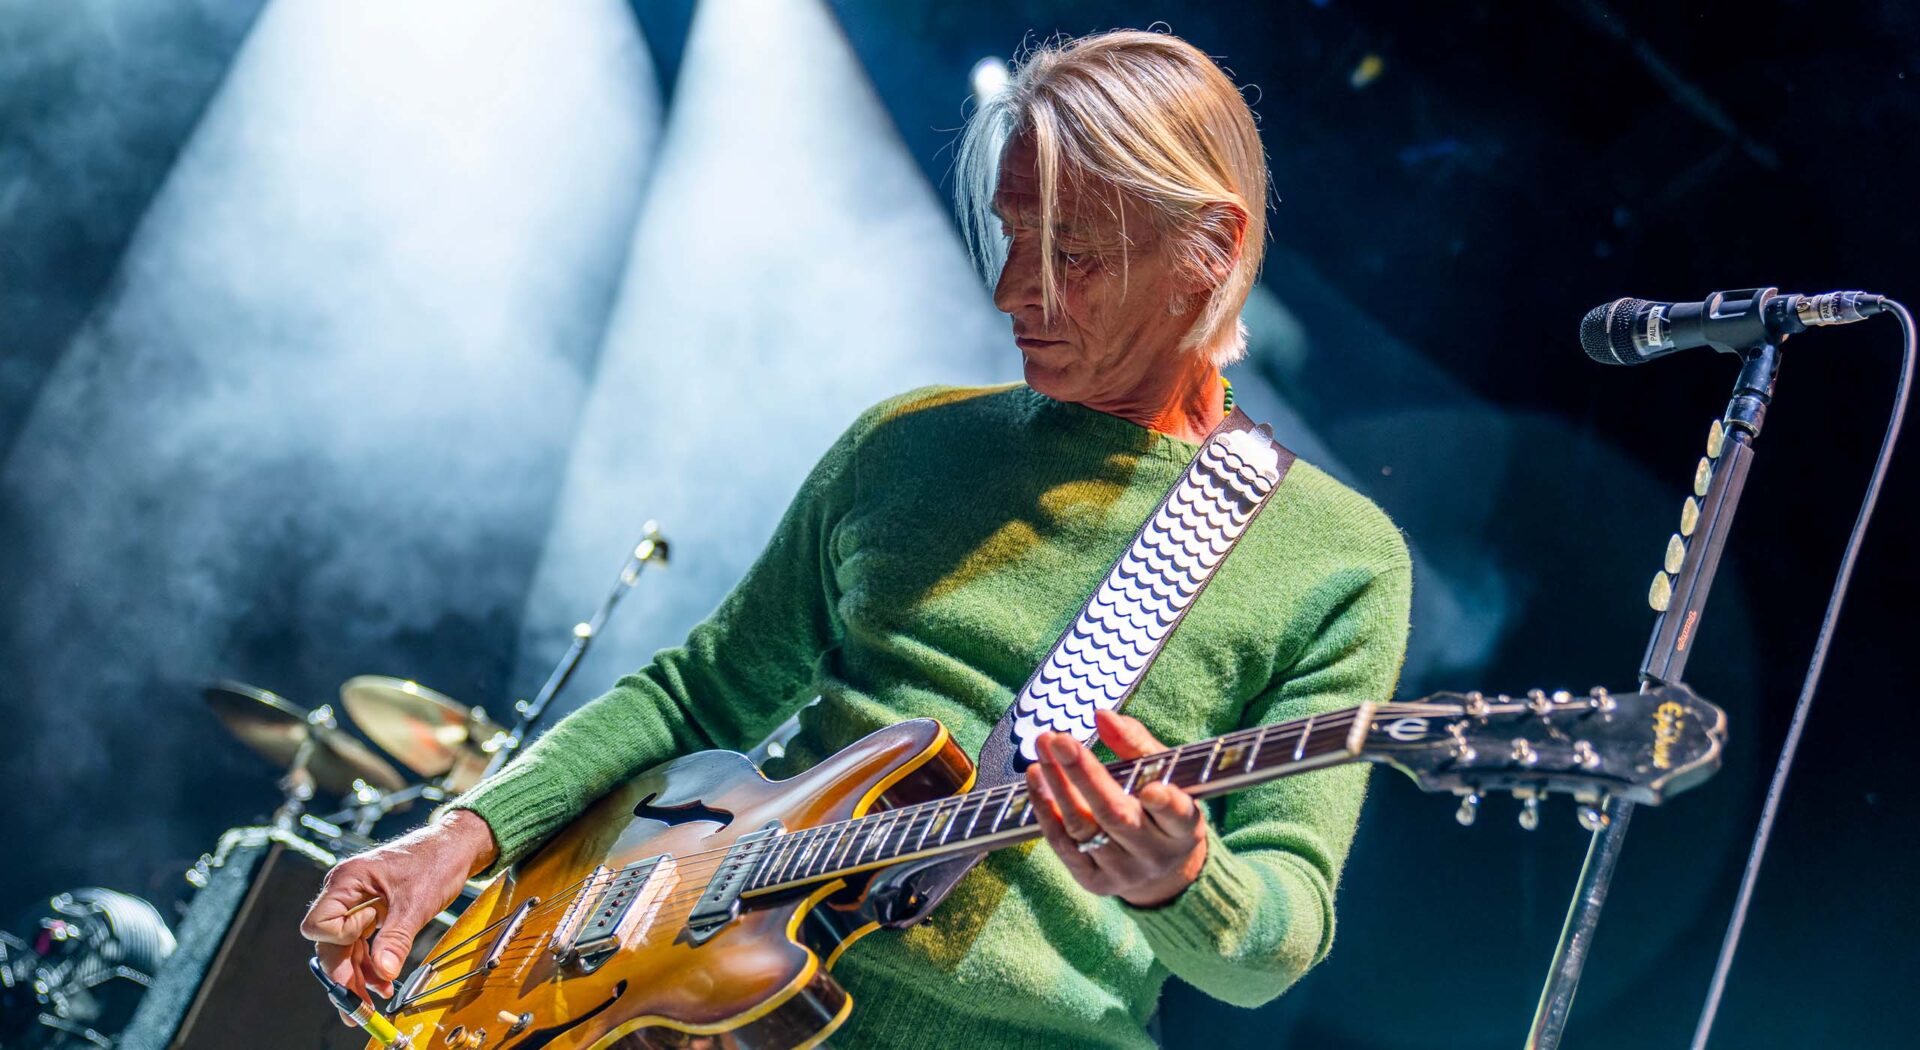 Paul Weller Biography: Net Worth, Height, Instagram, Age, Songs, Wife, Parents